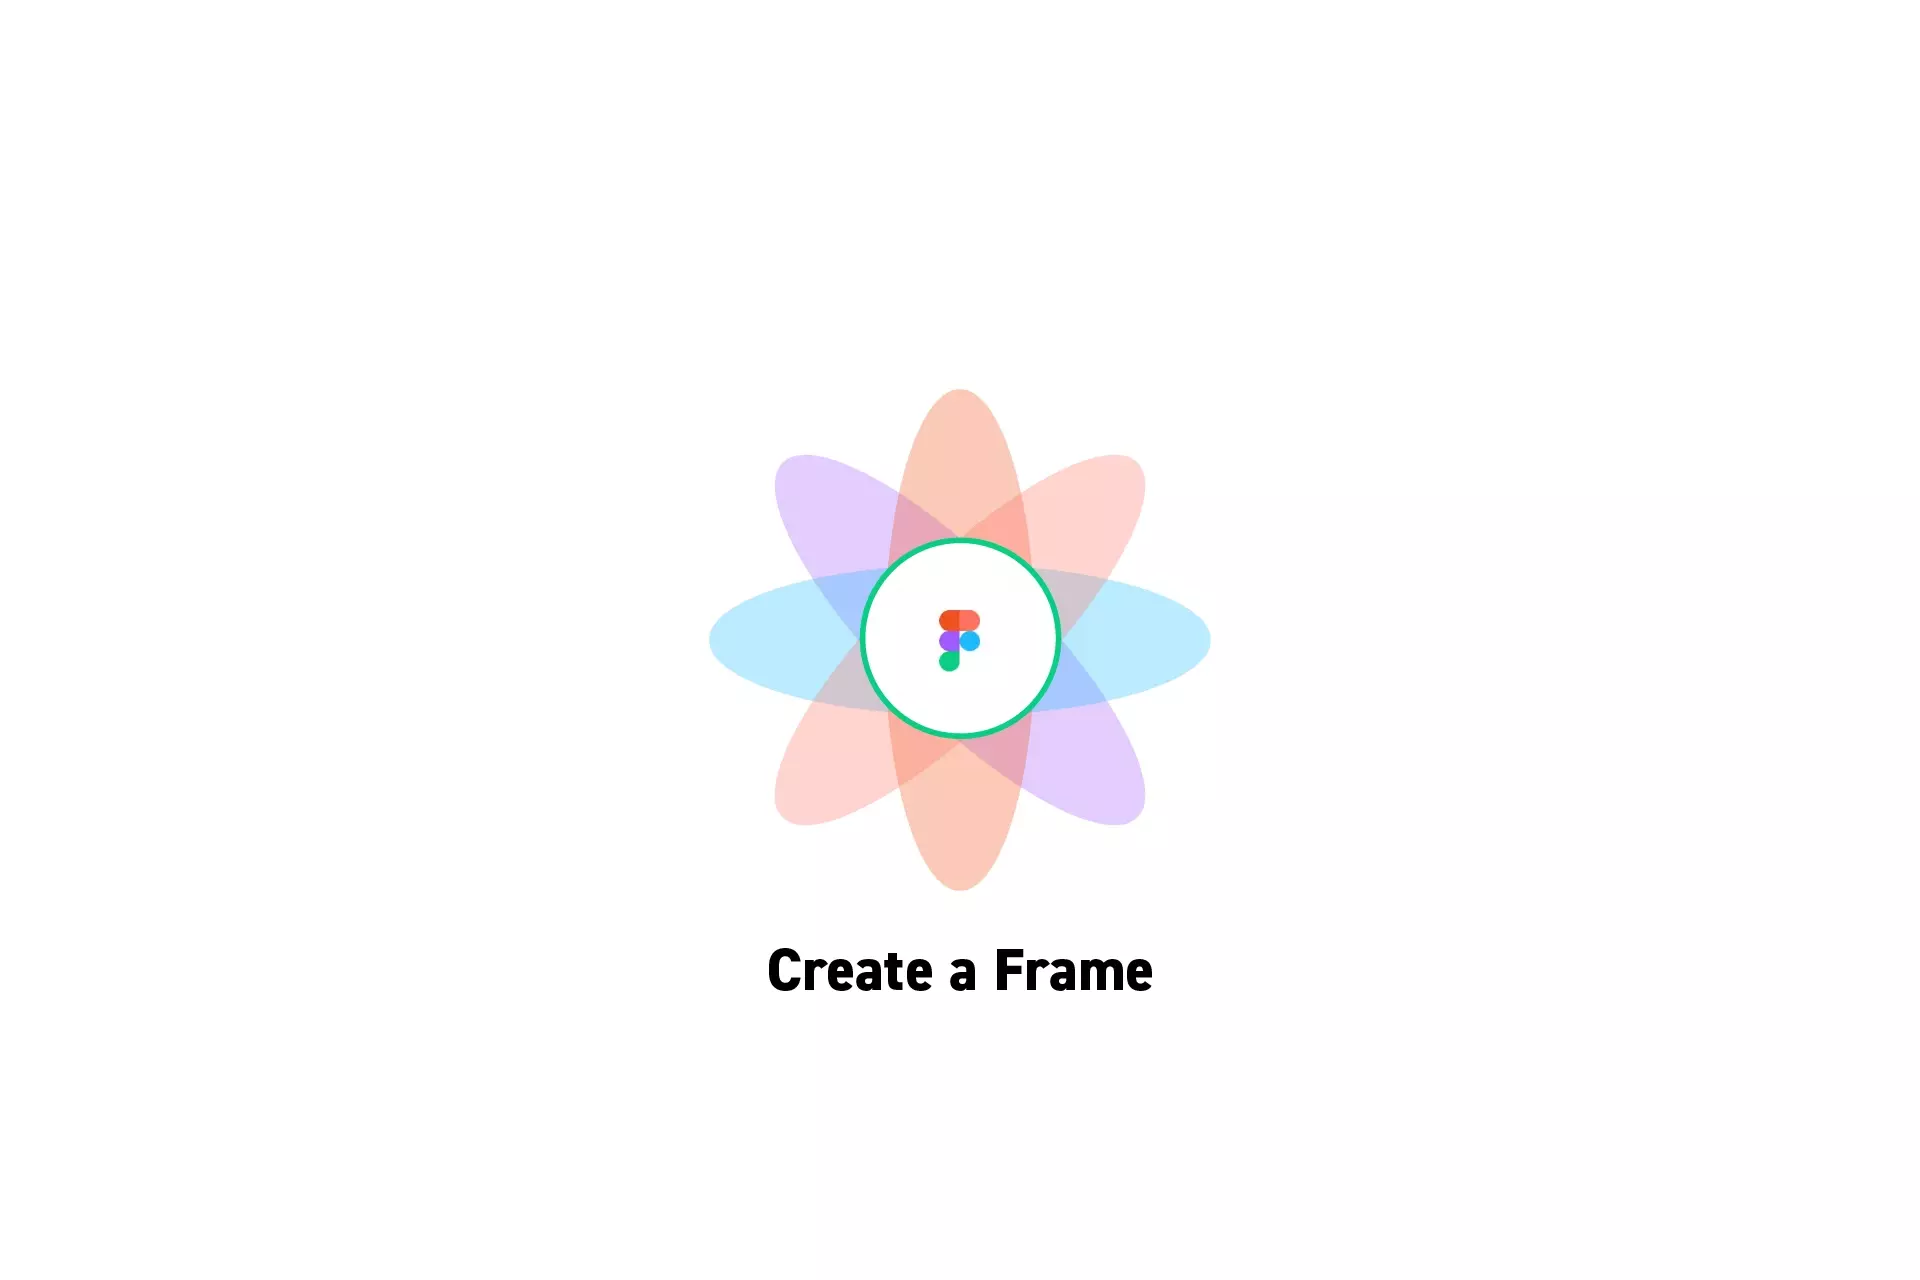 A flower that represents Figma with the text “Create a Frame” beneath it.